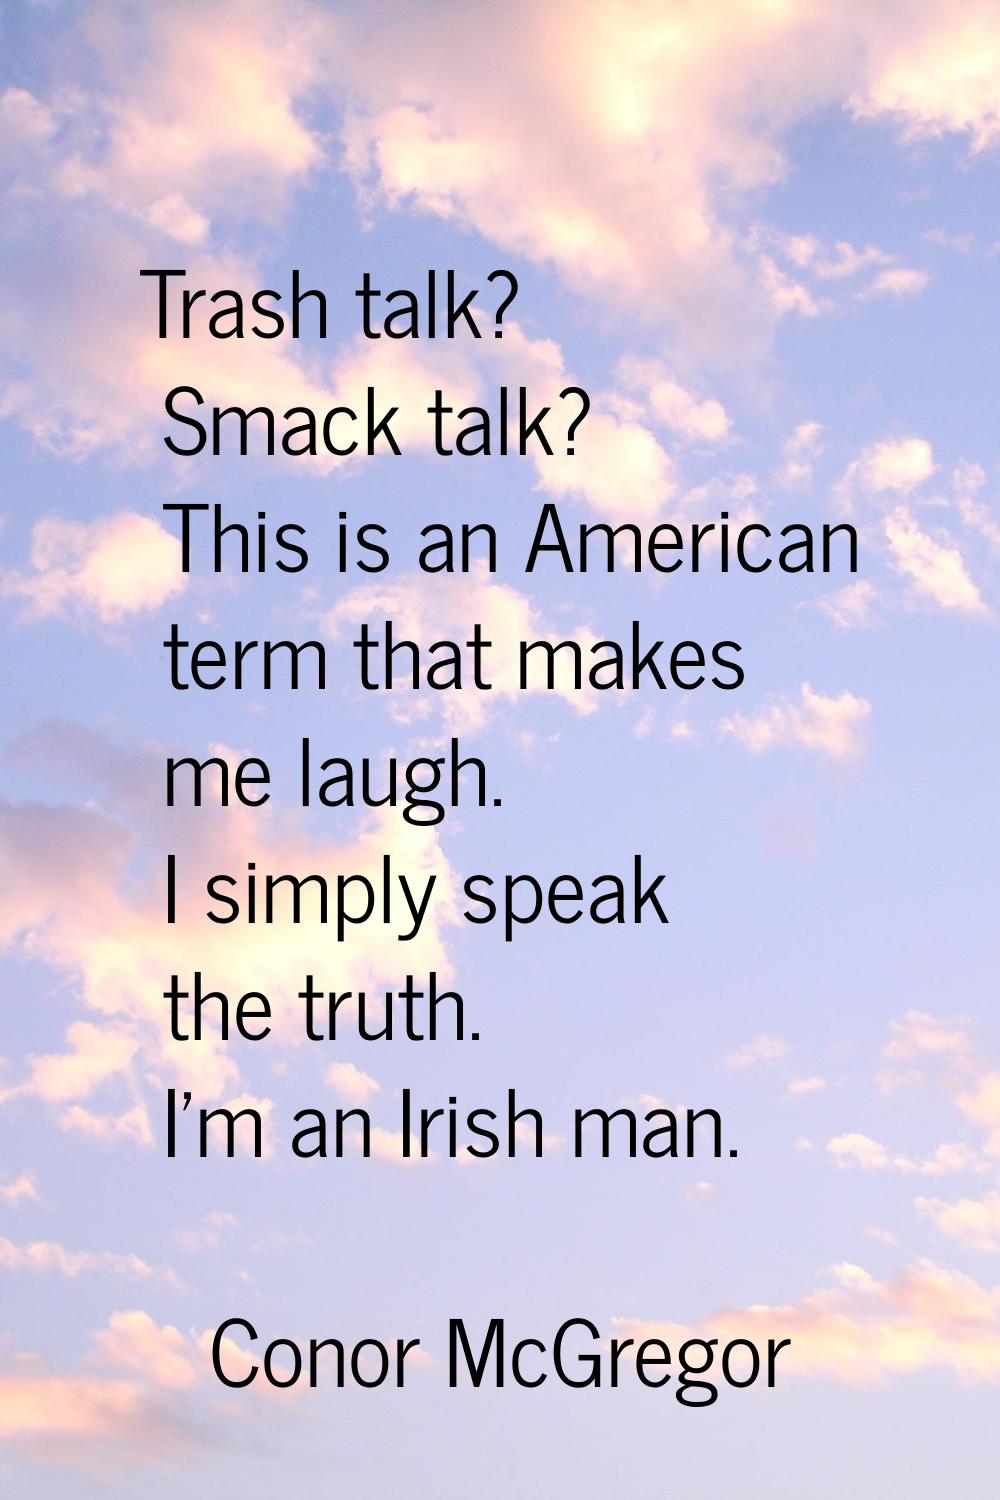 Trash talk? Smack talk? This is an American term that makes me laugh. I simply speak the truth. I'm